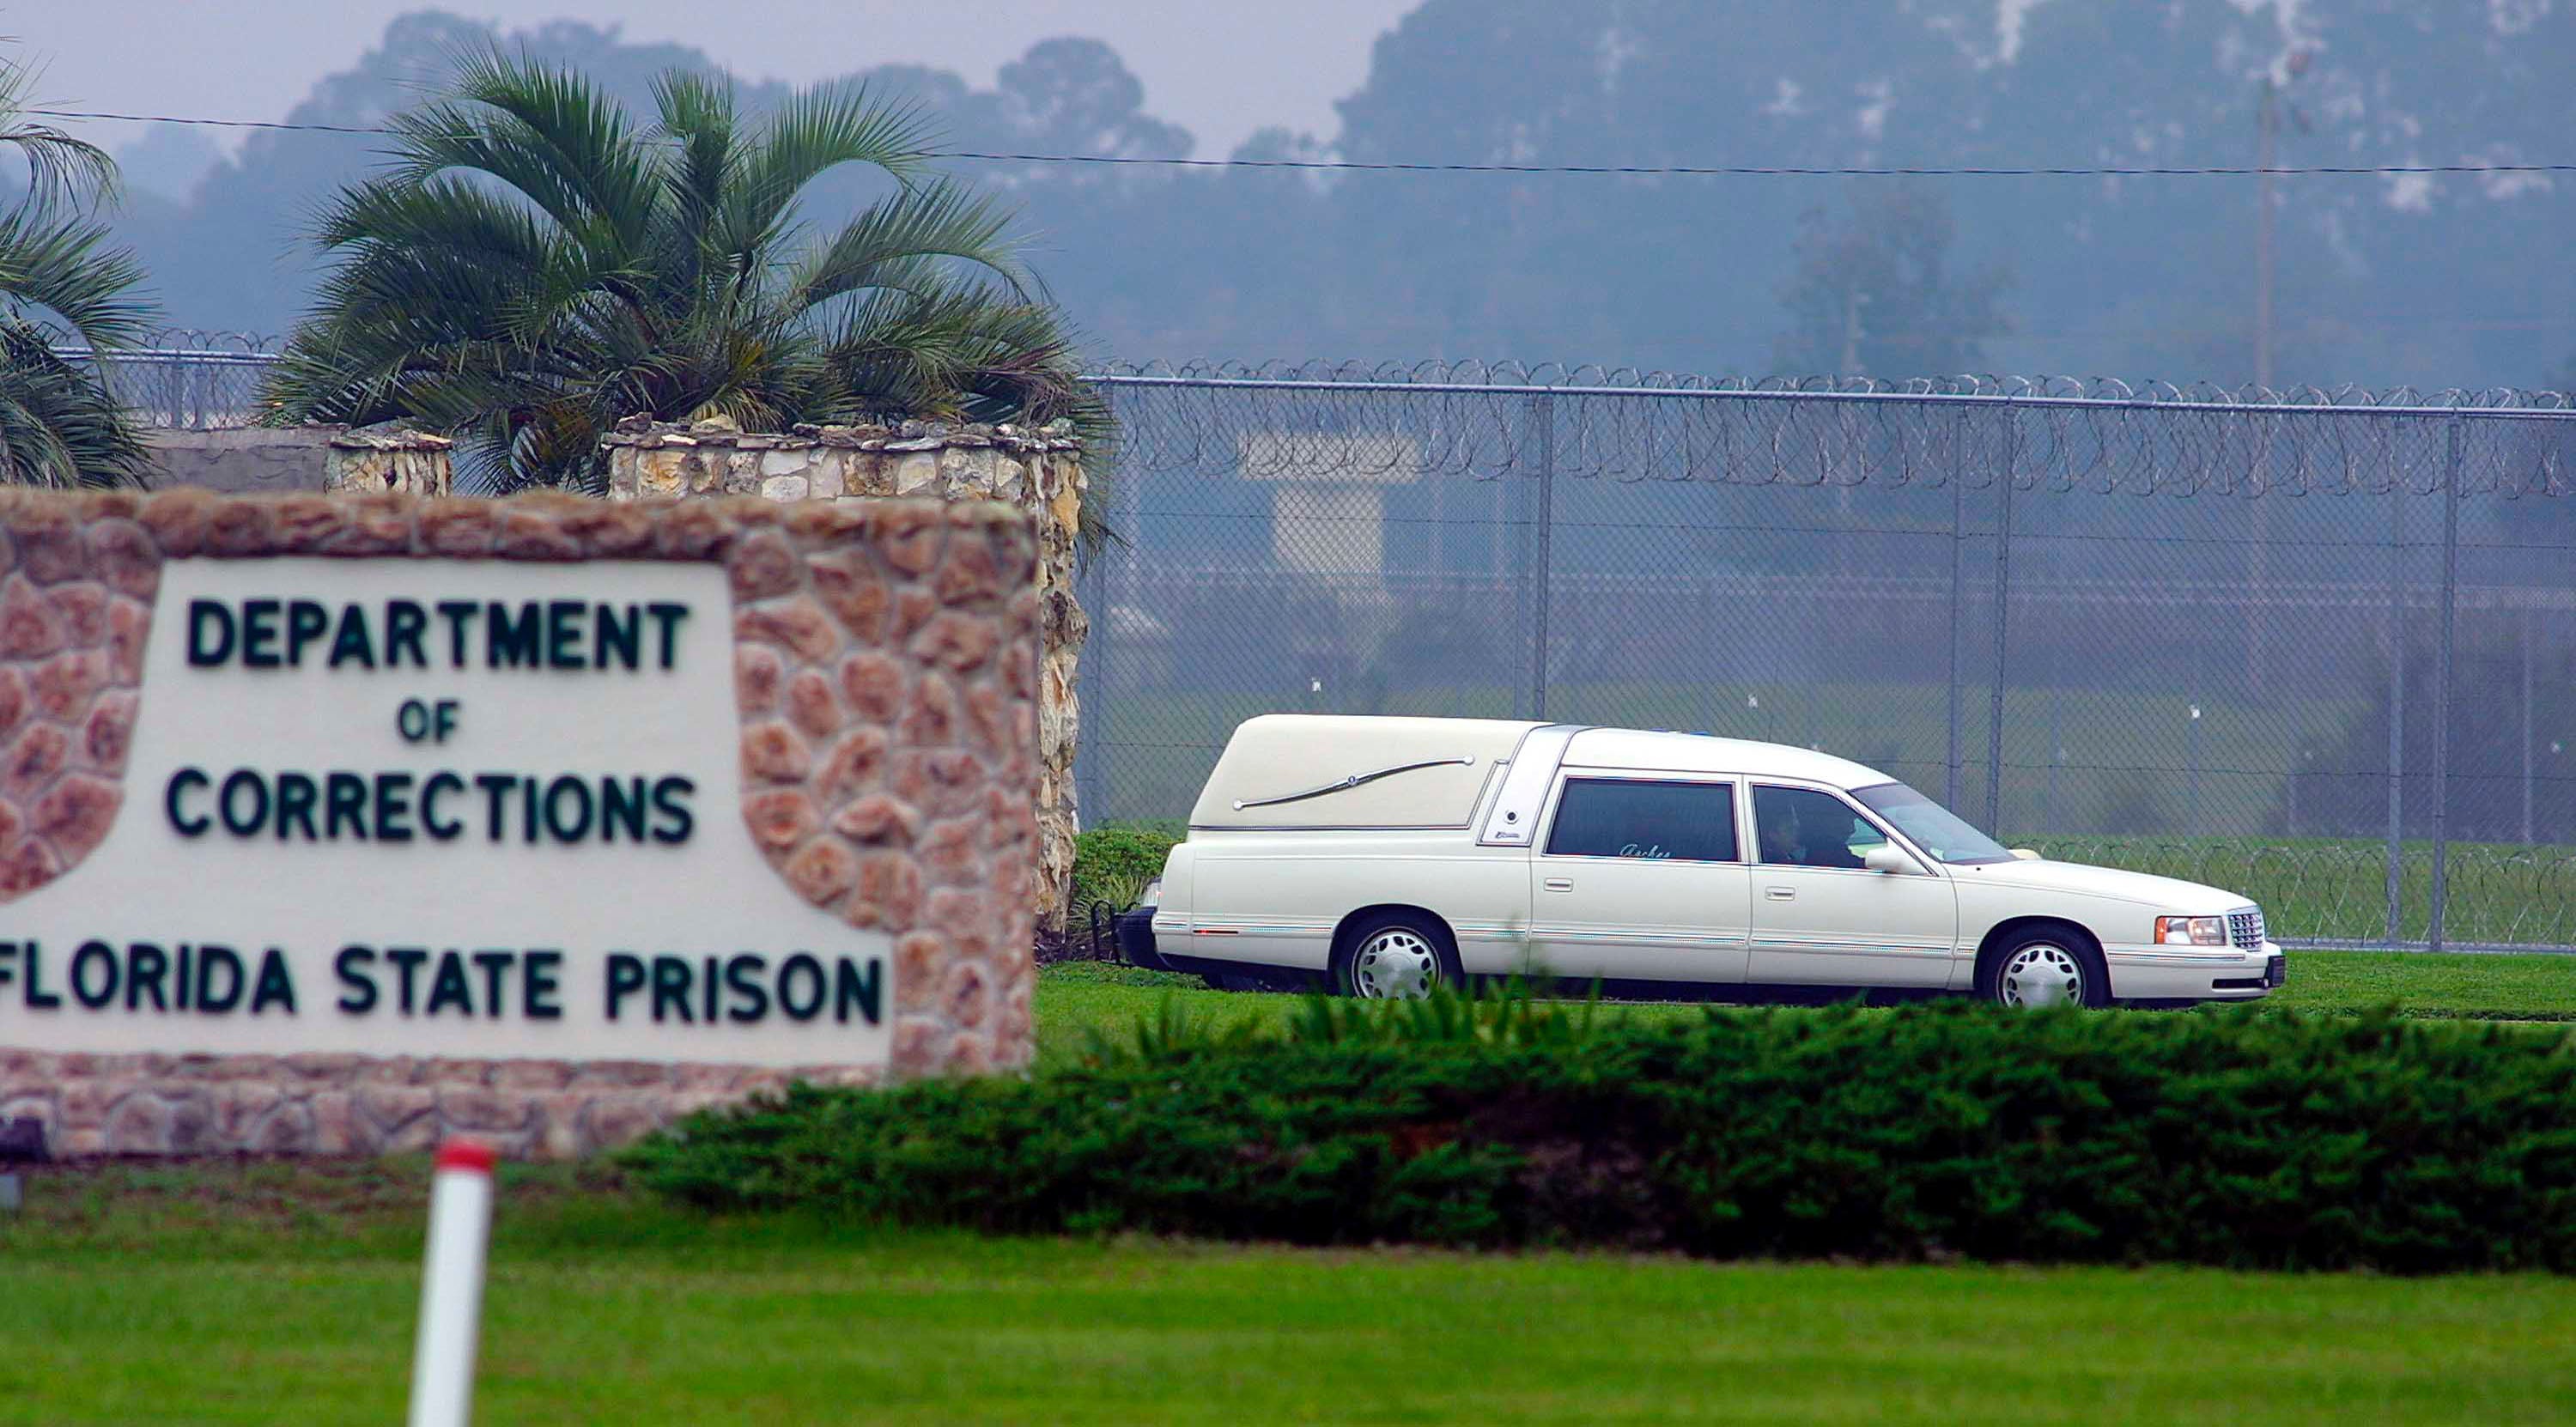 The hearse carrying the body of convicted killer Aileen Wuornos leaves the Florida State Prison after her execution